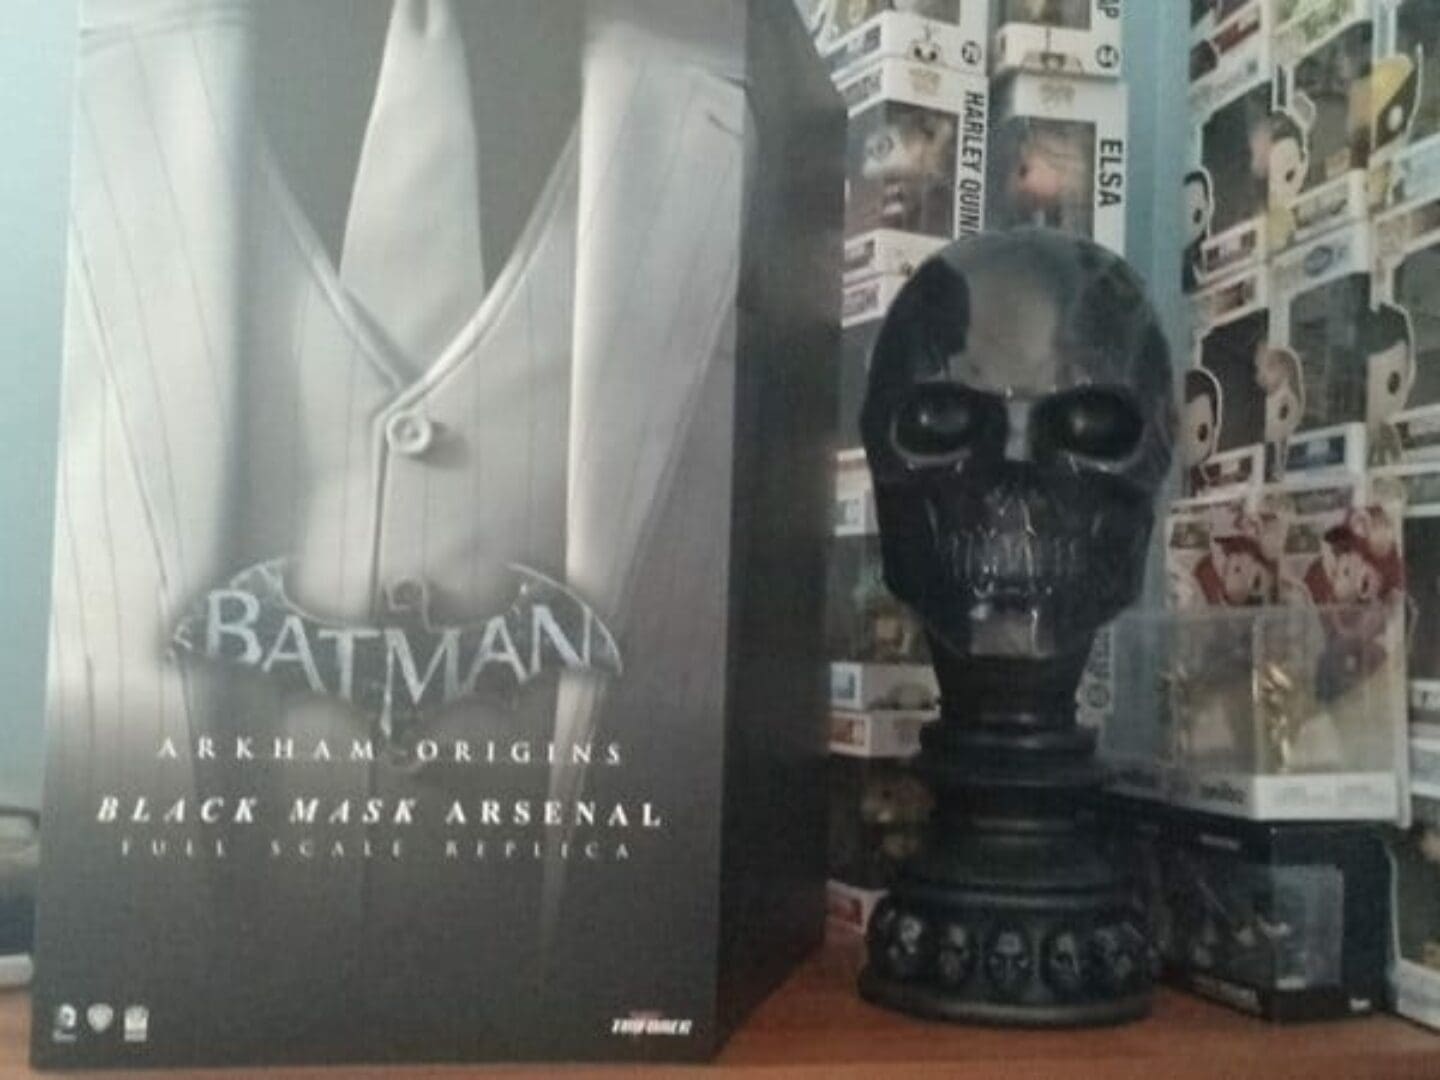 We’re giving away a Batman Arkham Origins: Black Mask Arsenal Replica from Project Triforce